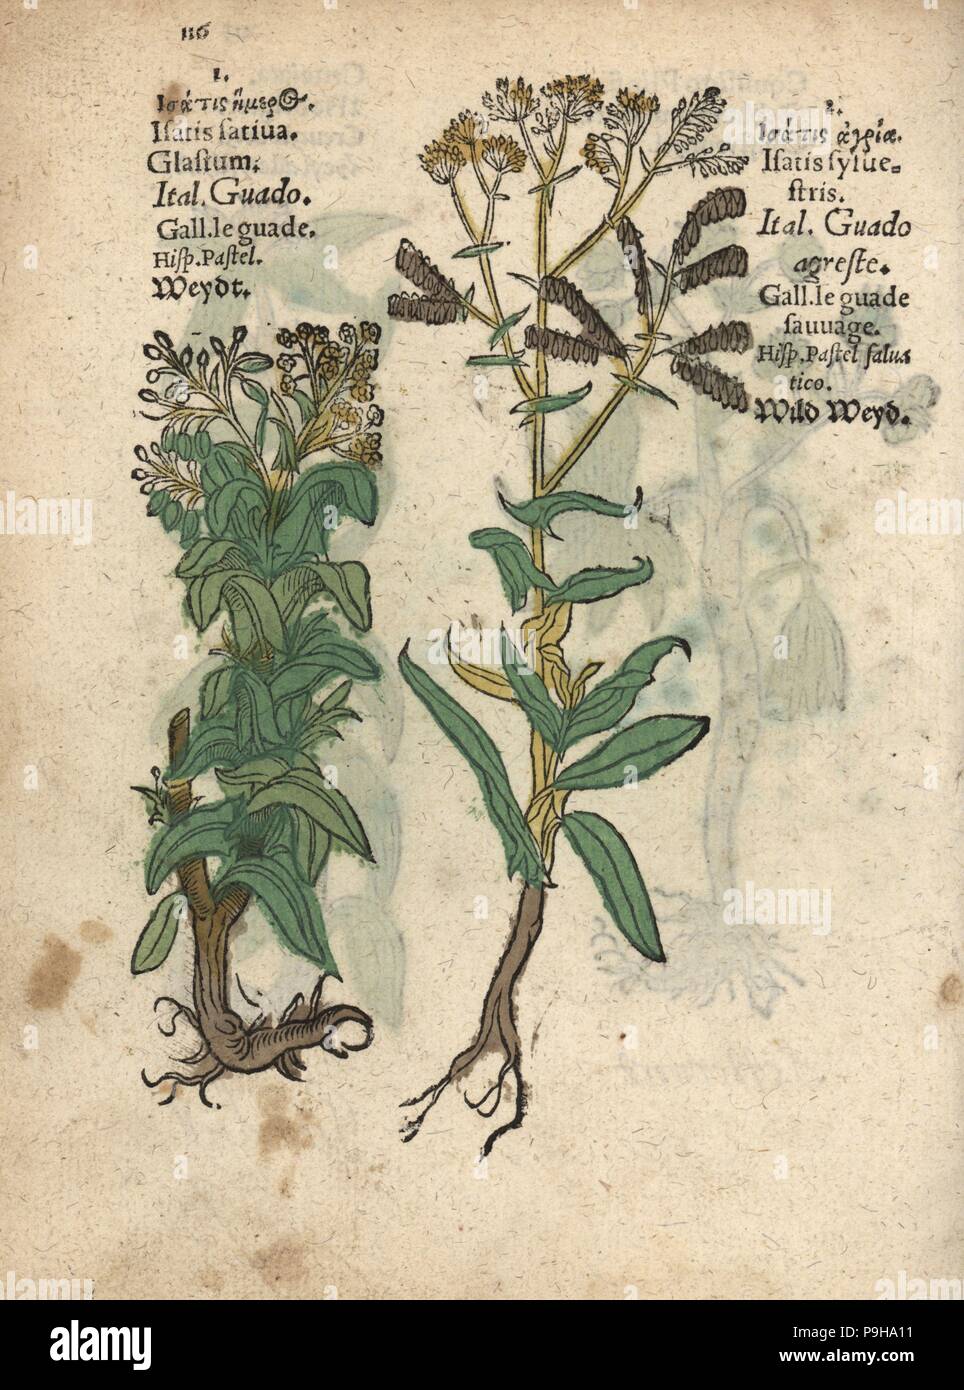 Woad species, Isatis tinctoria. Handcoloured woodblock engraving of a botanical illustration from Adam Lonicer's Krauterbuch, or Herbal, Frankfurt, 1557. This from a 17th century pirate edition or atlas of illustrations only, with captions in Latin, Greek, French, Italian, German, and in English manuscript. Stock Photo